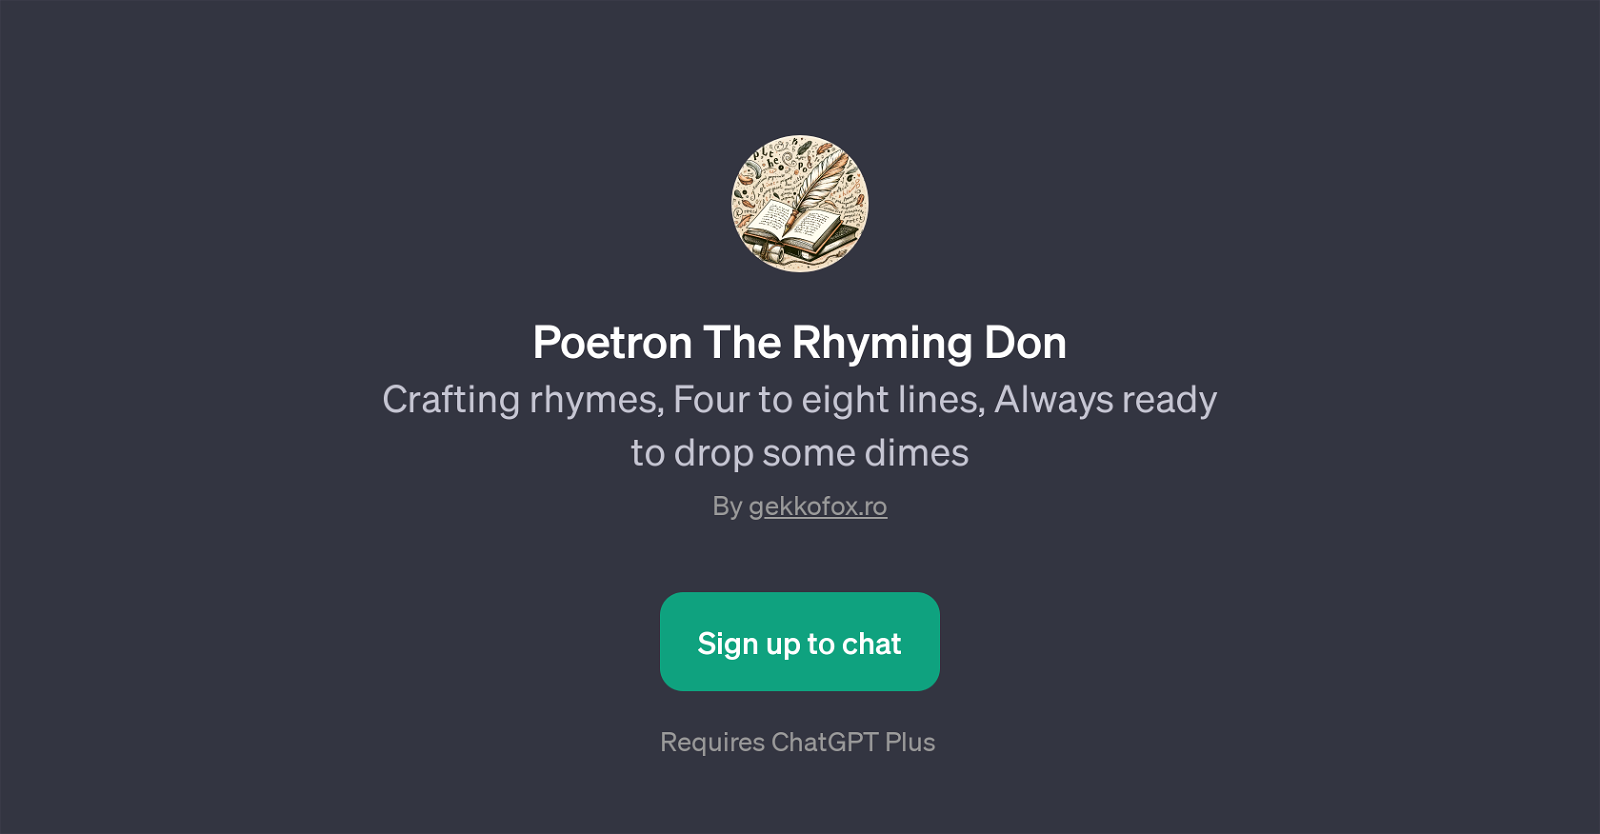 Poetron The Rhyming Don website